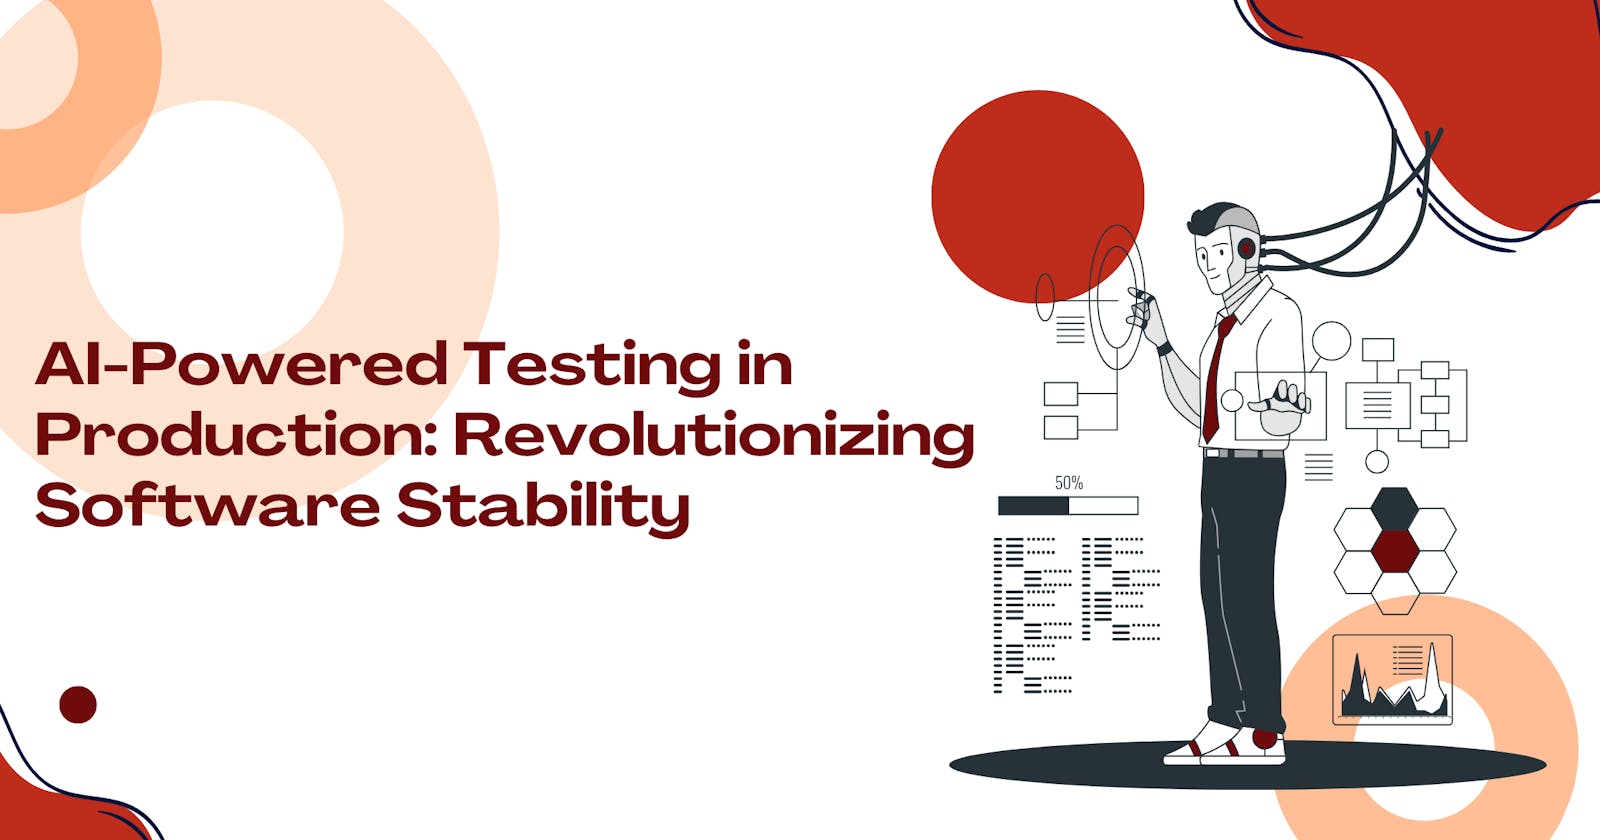 AI-Powered Testing in Production: Revolutionizing Software Stability